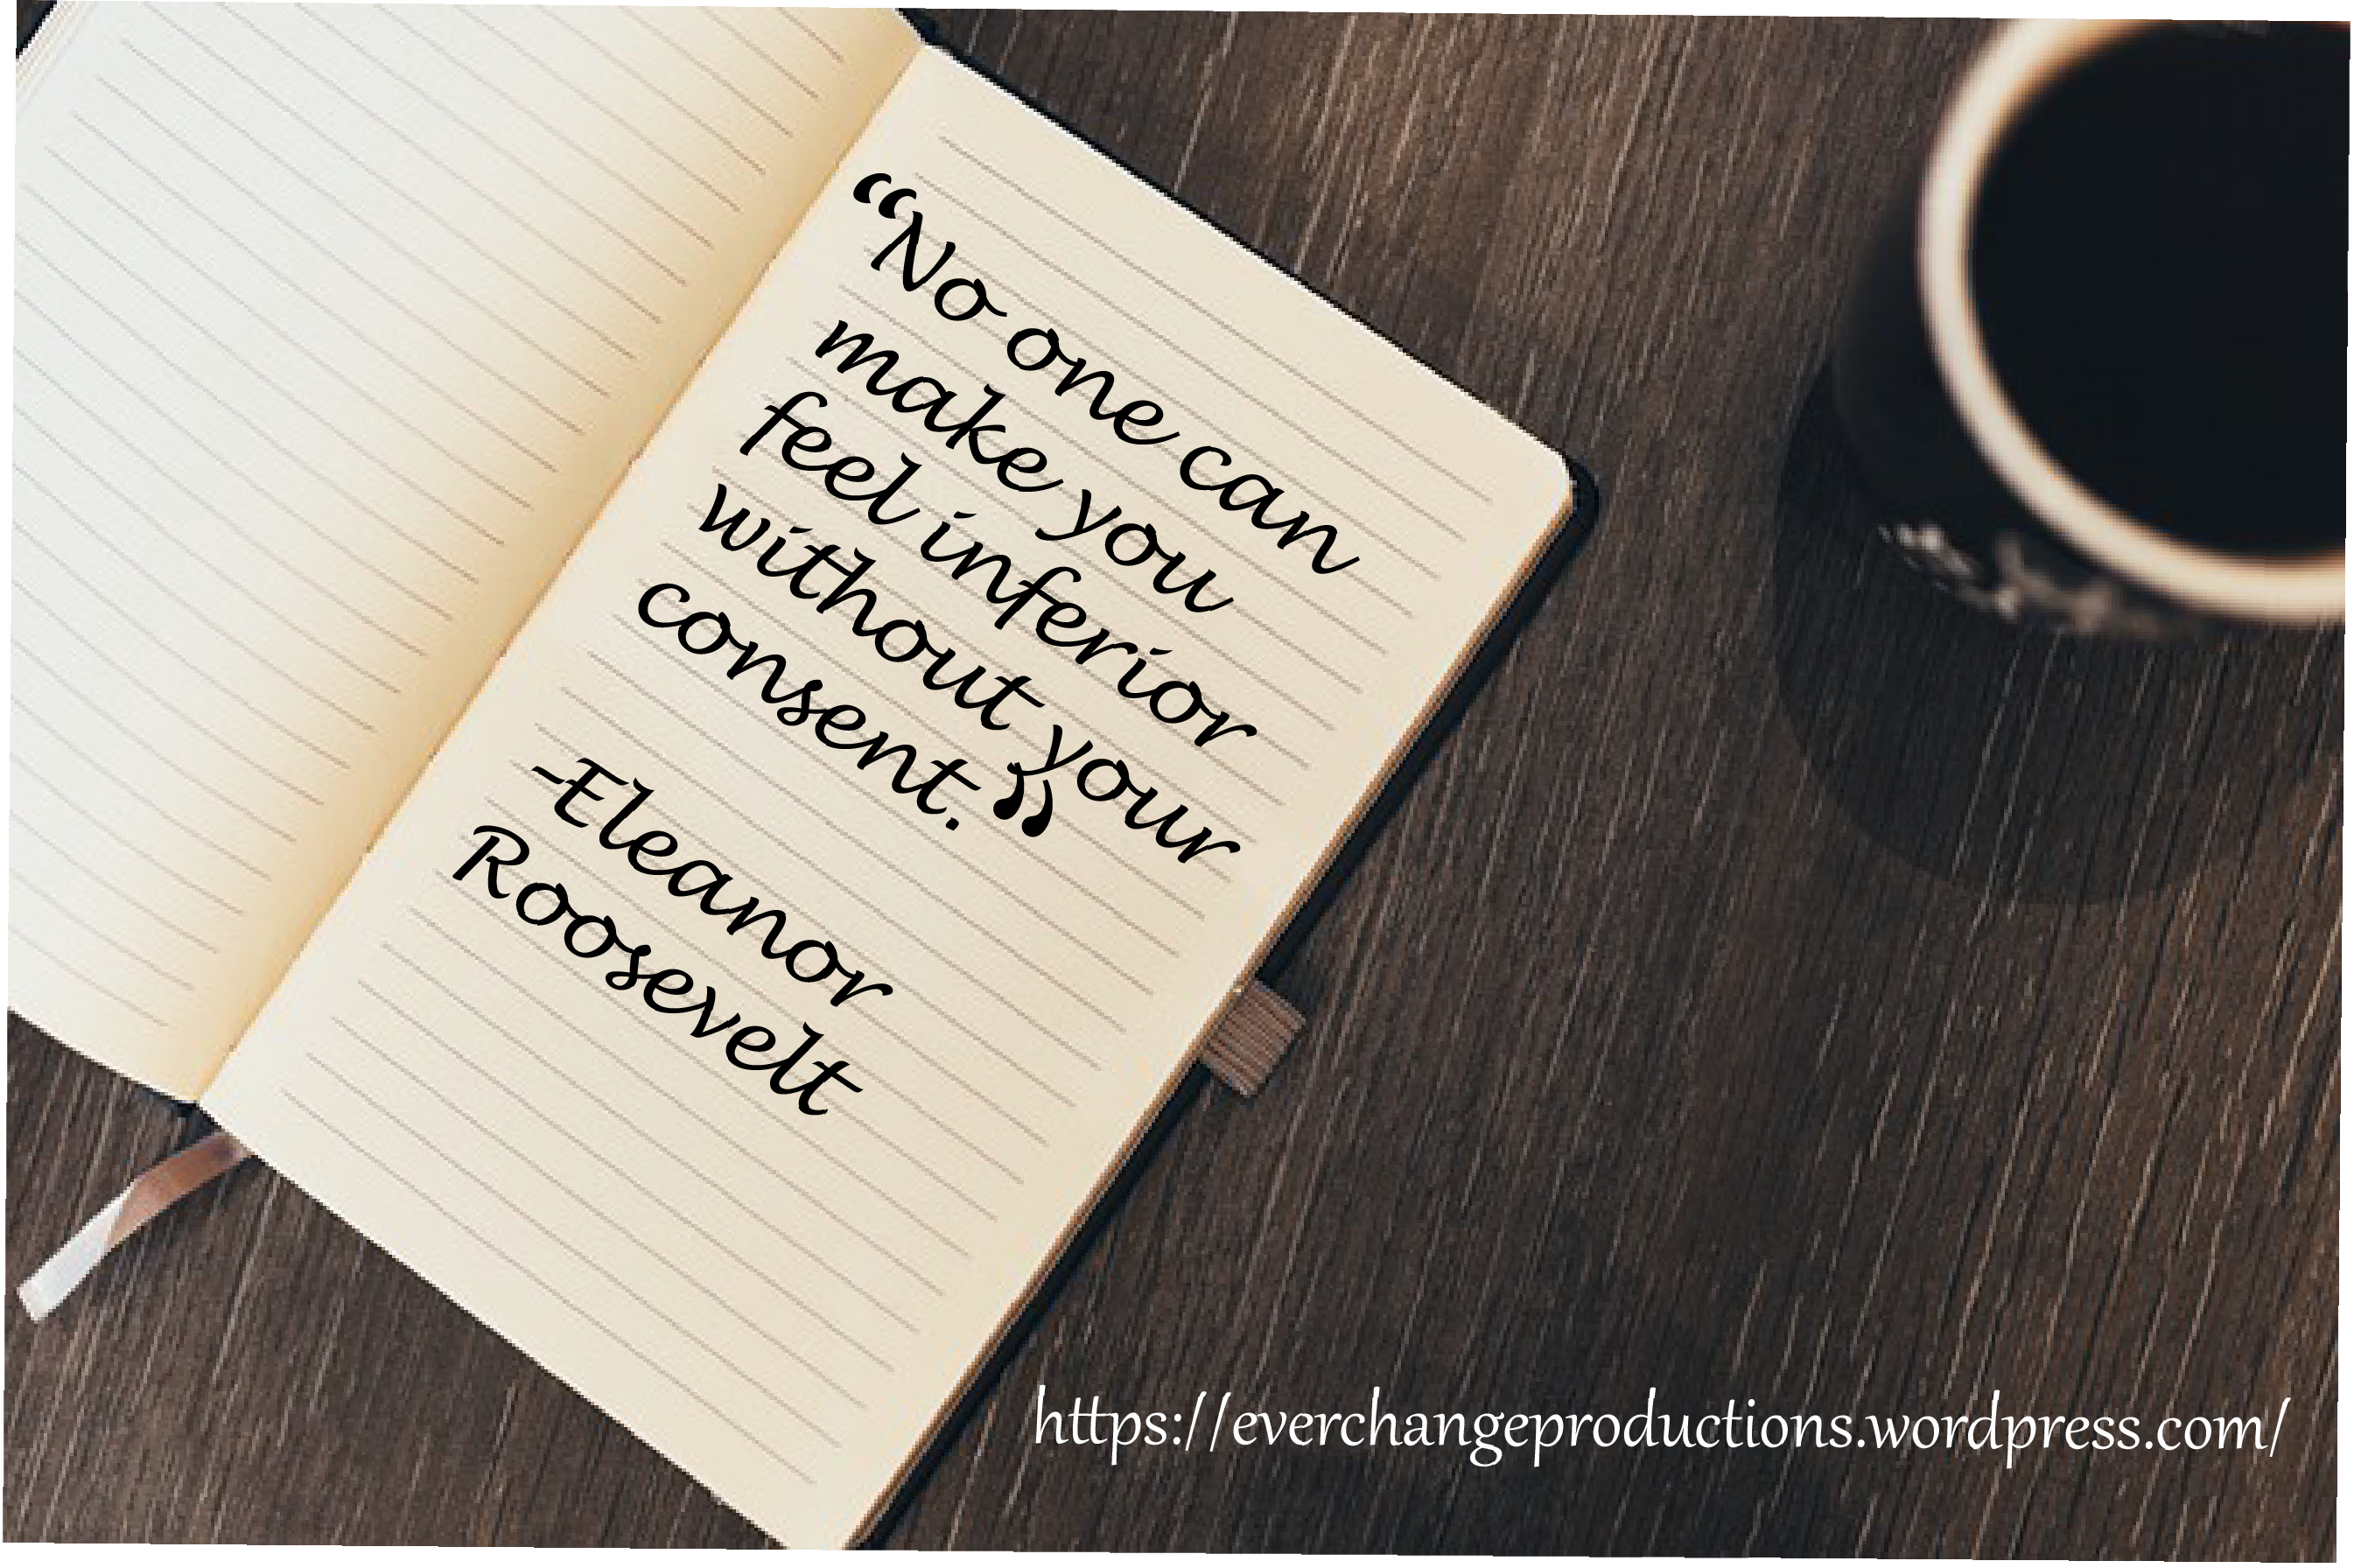 Need some Monday Motivation to start your week off? Just remember: "No one can make you feel inferior without your consent." -Eleanor Roosevelt